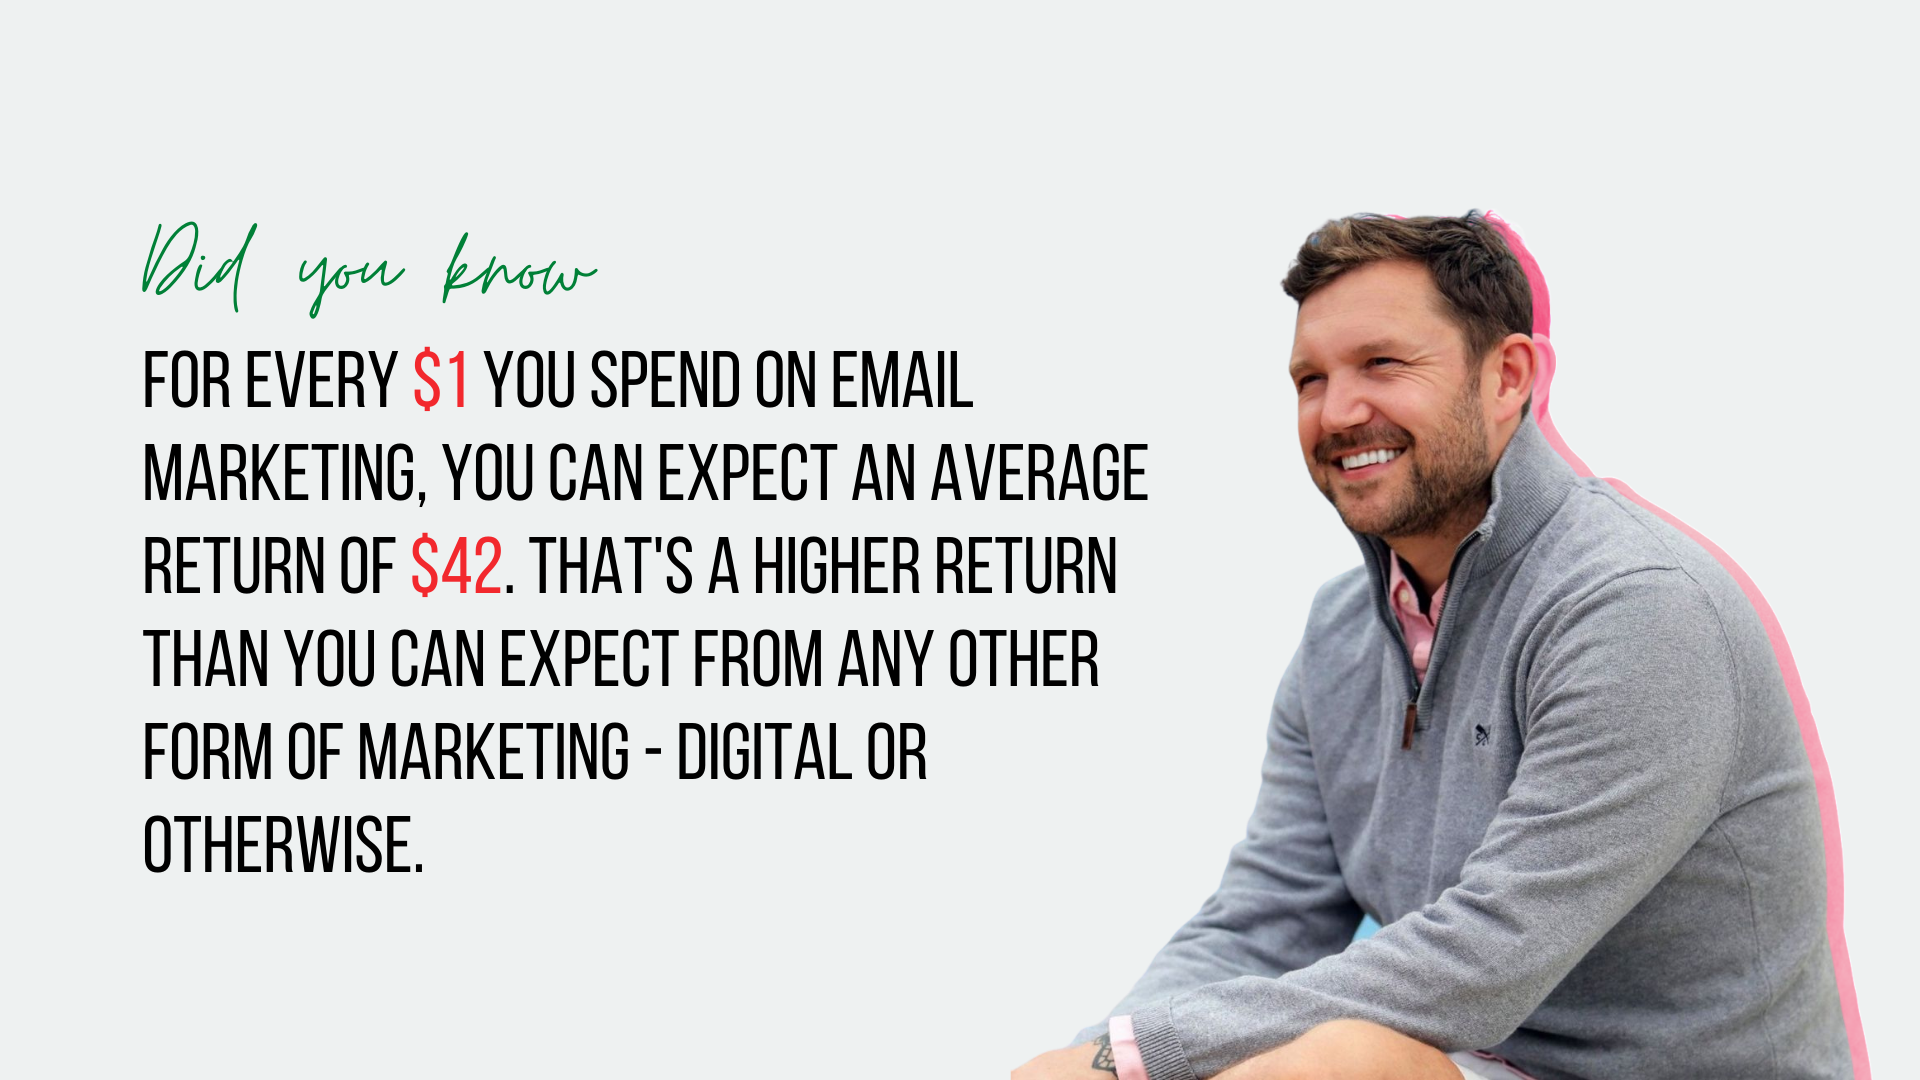 For every $1 you spend on email marketing, you can expect an average return of $42. That's a higher return than you can expect from any other form of marketing — digital or otherwise.